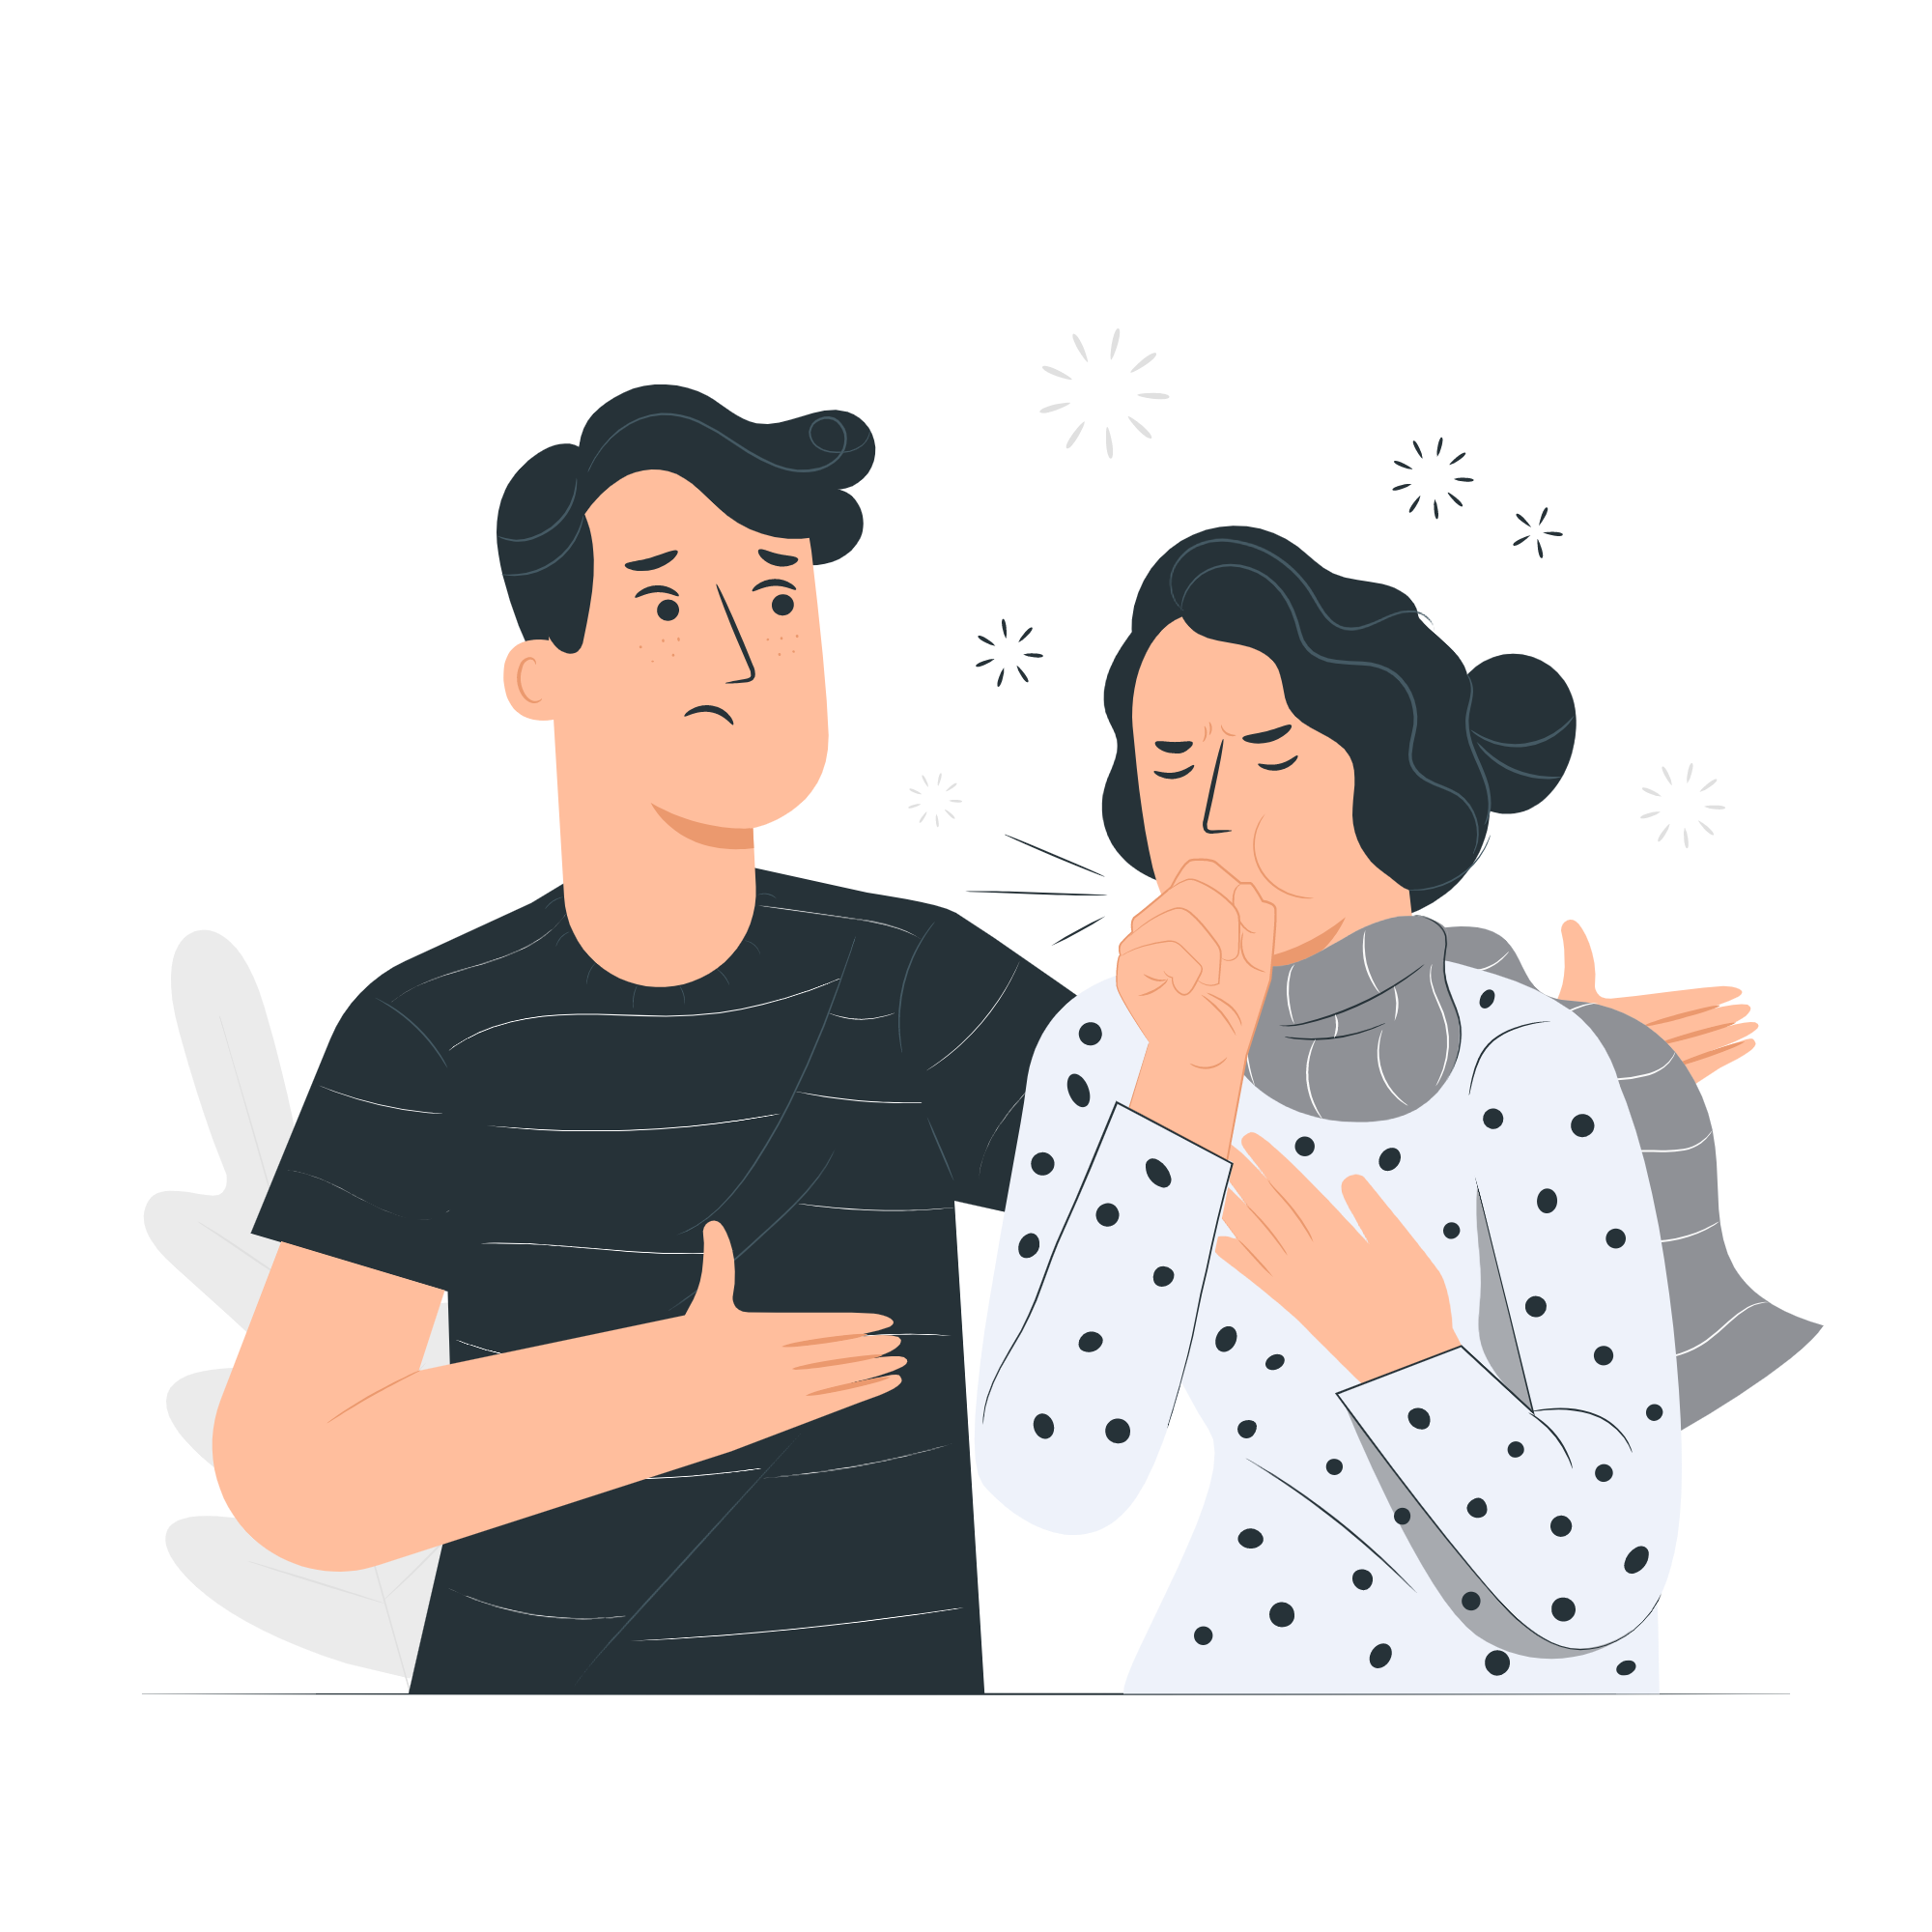 illustration of a sick person being comforted by another person